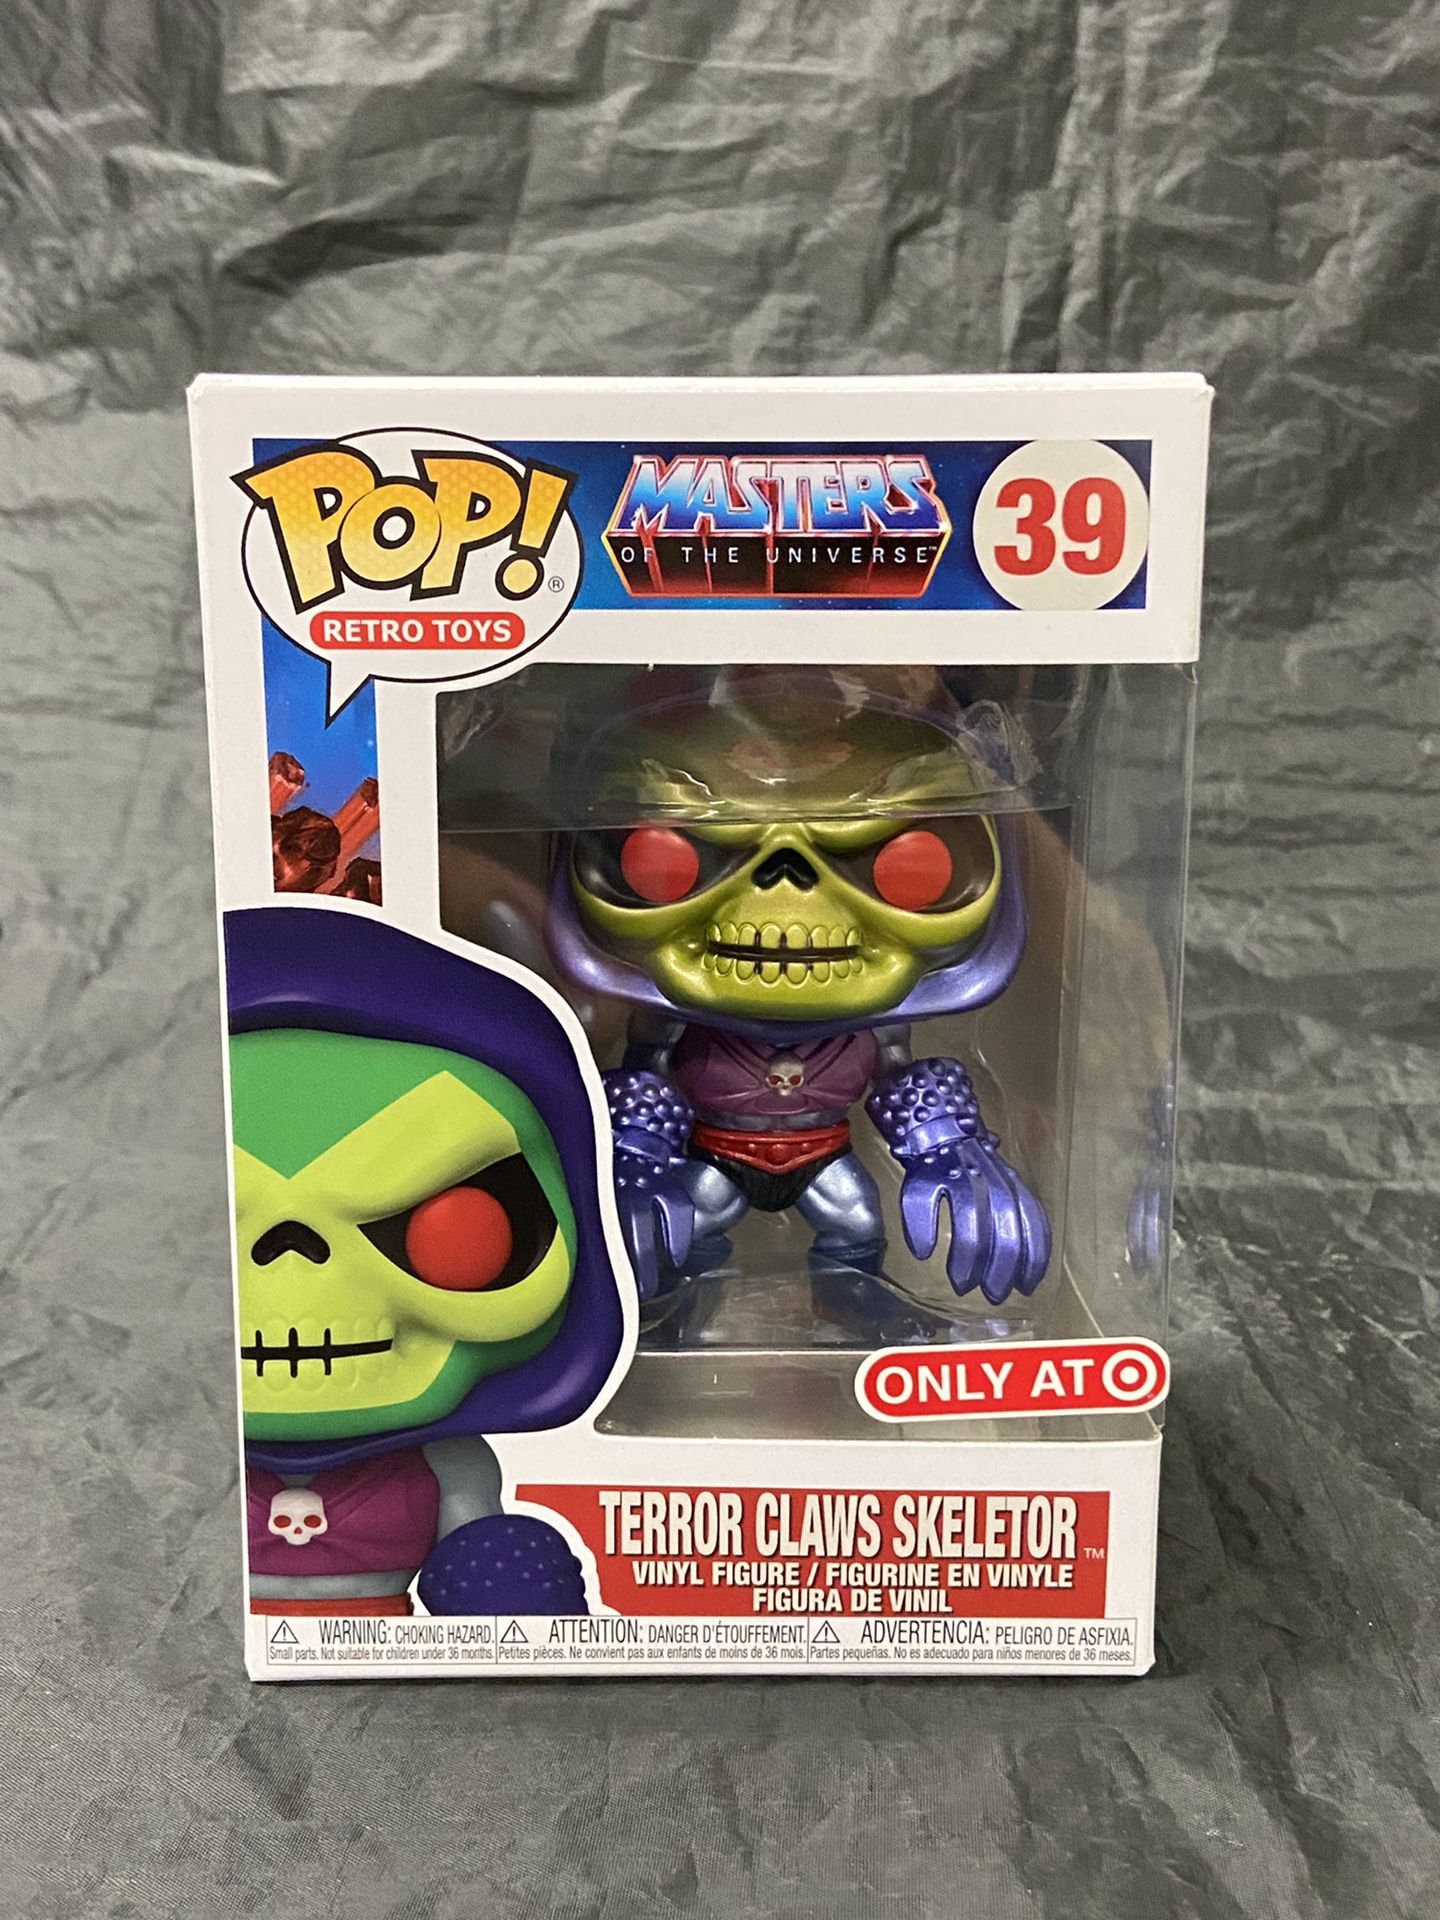 Funko Pop!: Masters of The Universe - Skeltor with Terror Claws